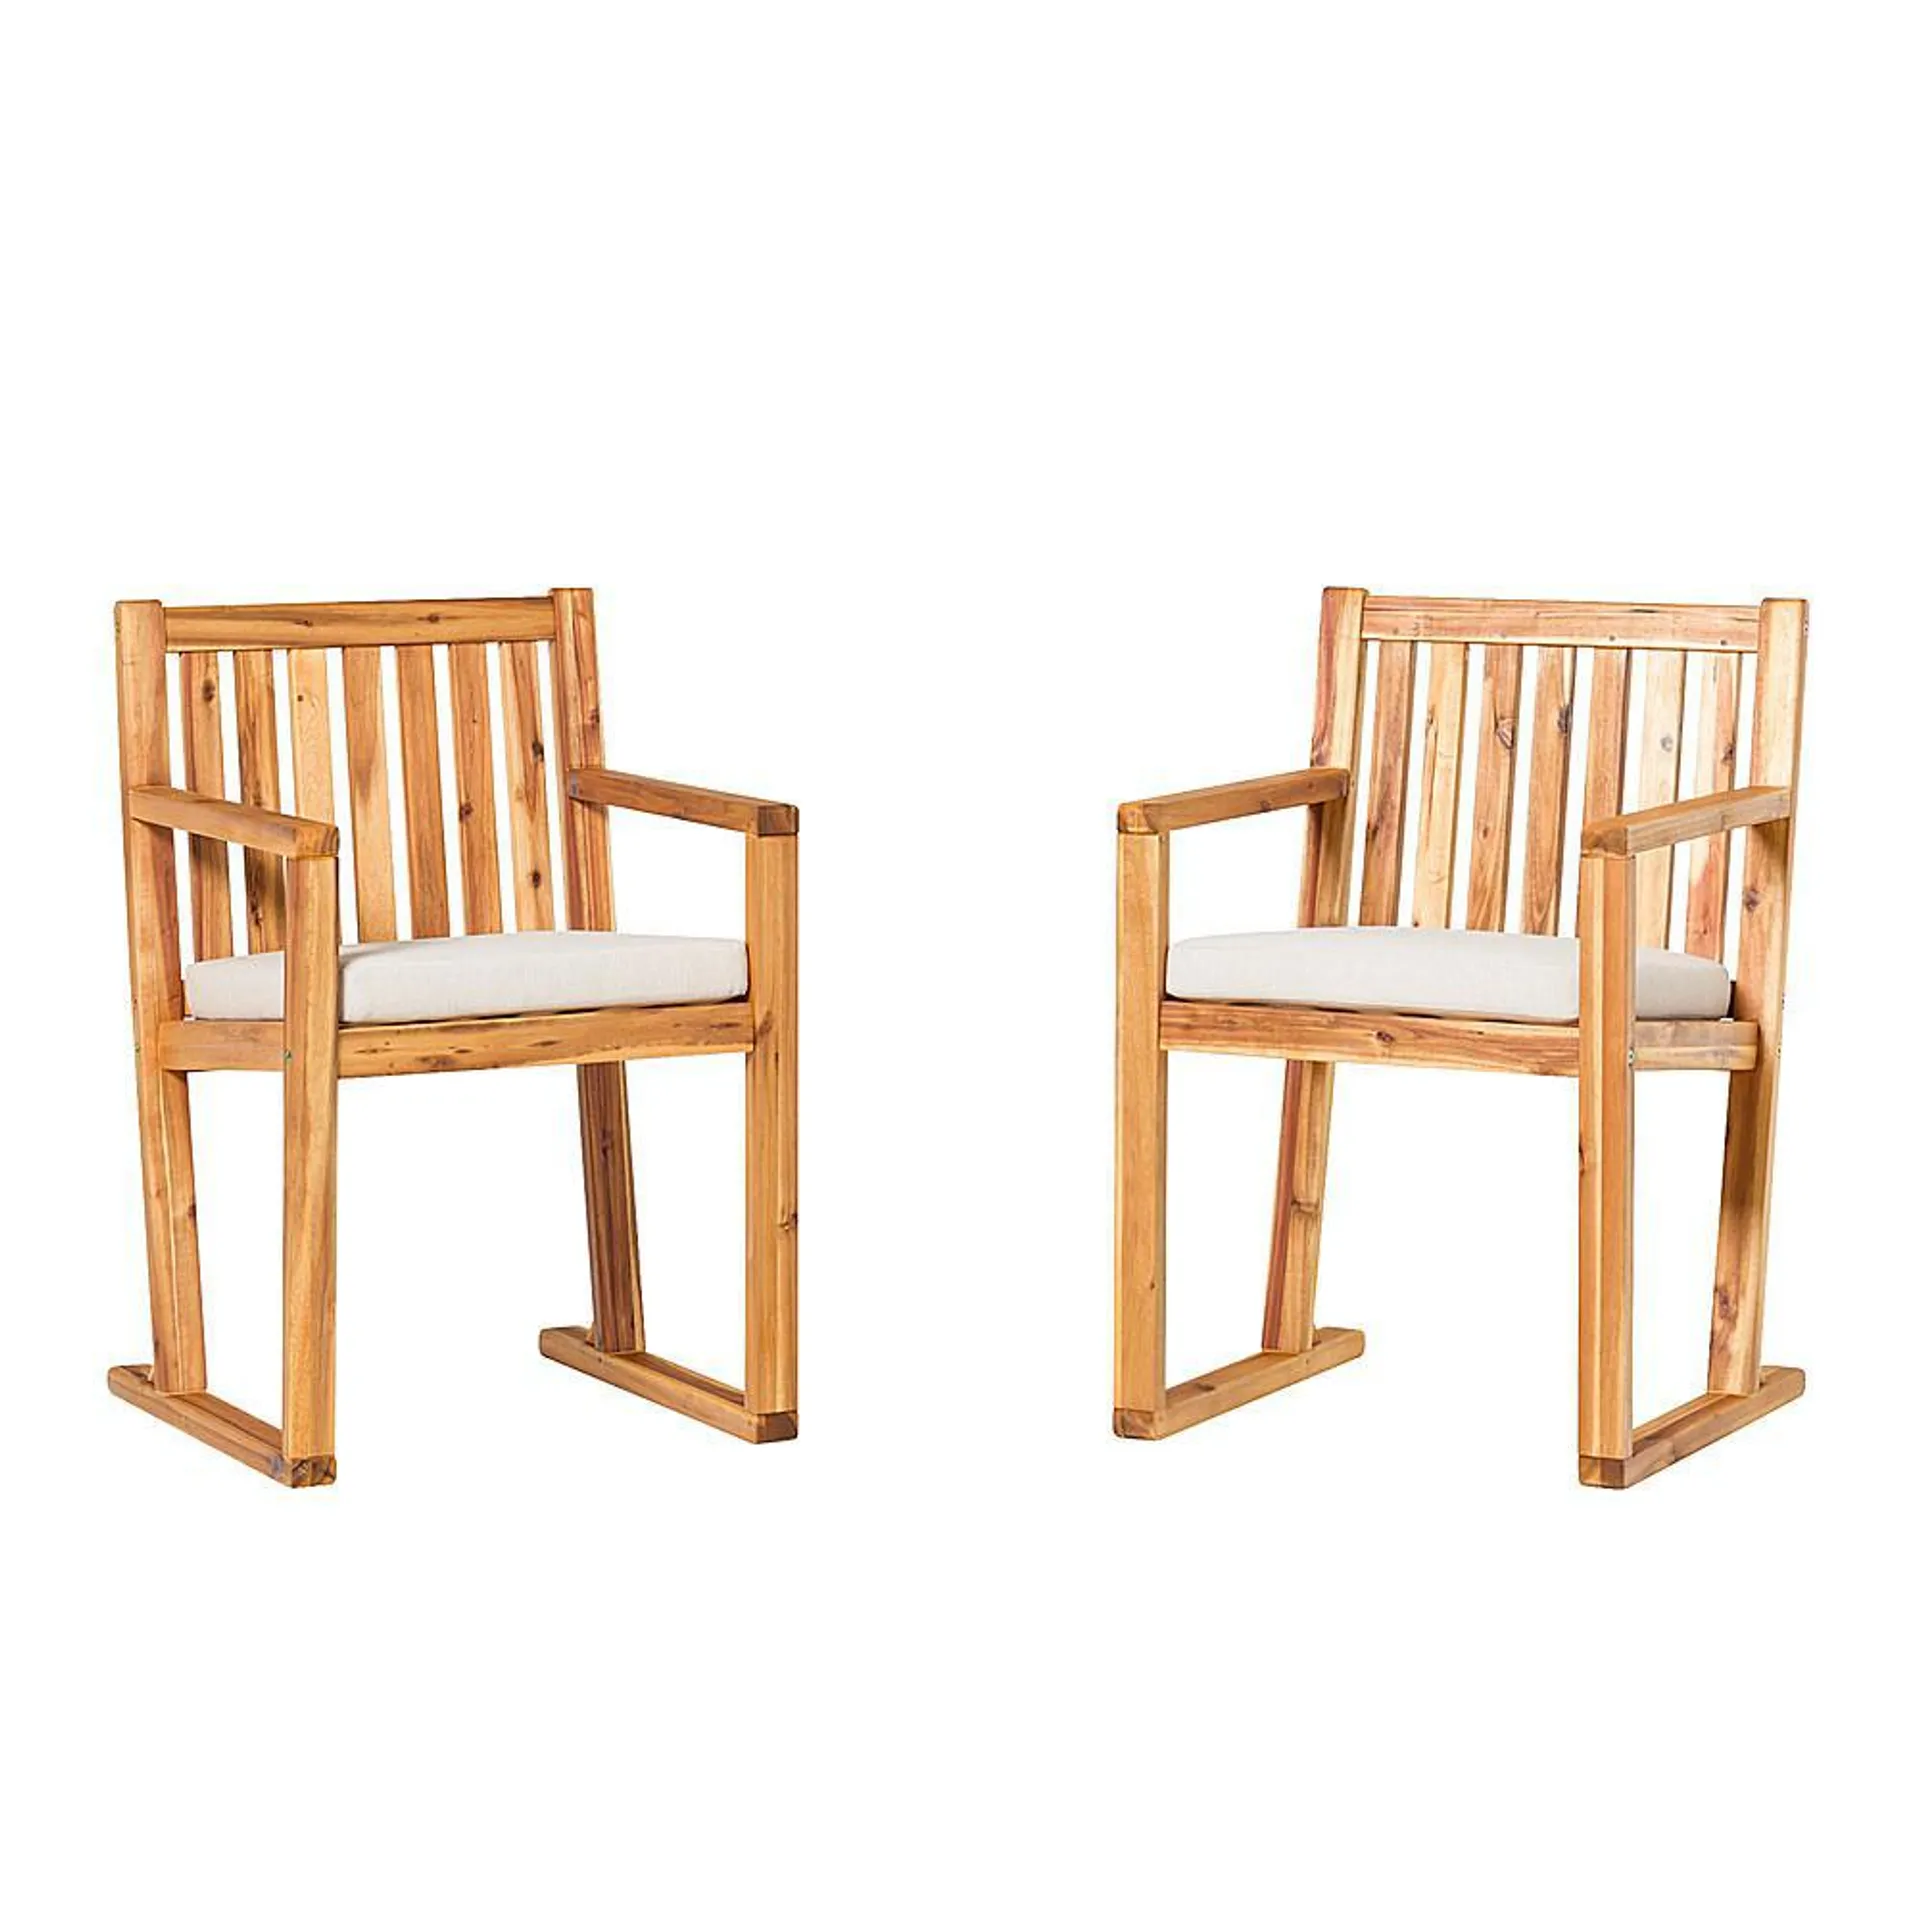 Walker Edison - Modern Solid Wood 2-Piece Slatted Outdoor Dining Chair Set - Natural